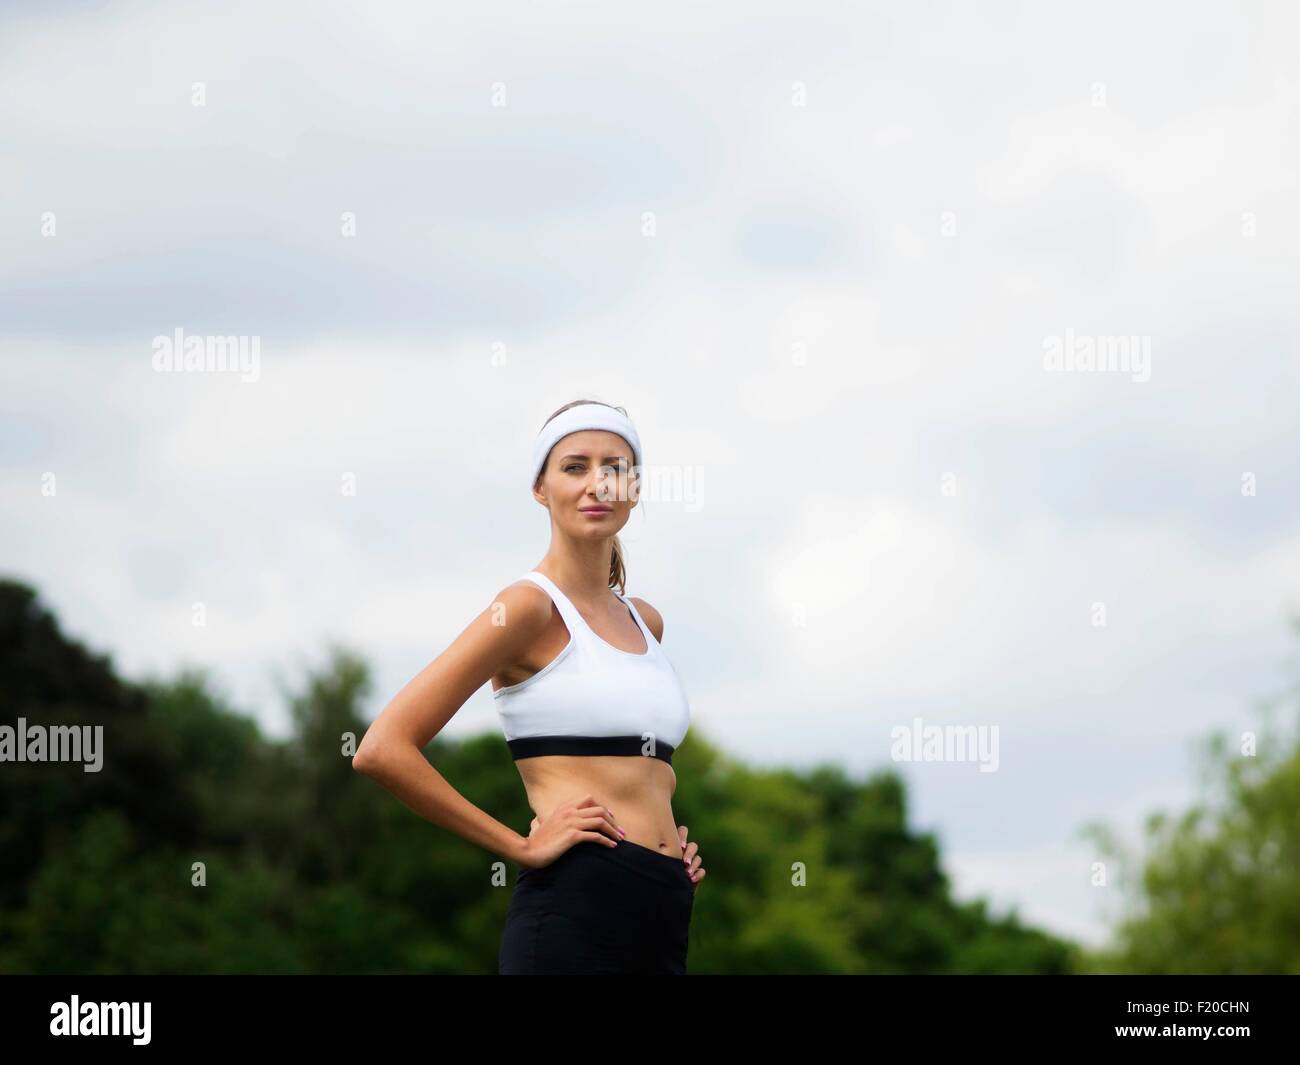 Portrait of woman in sports top Stock Photo